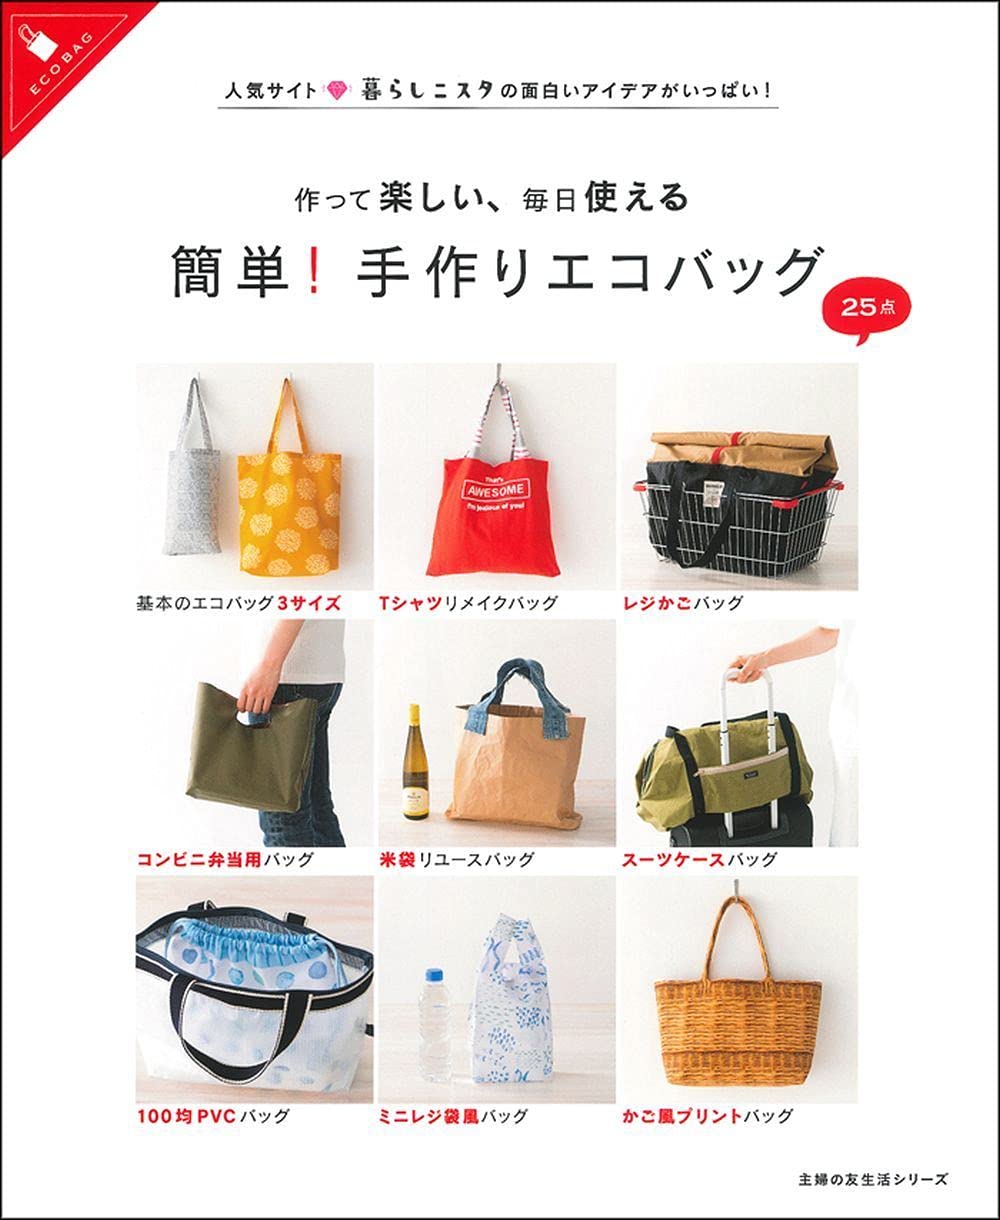 Cotton　The　Book　Shoppe　Japanese　Bags　Eco　Handmade　Simple　Sewing